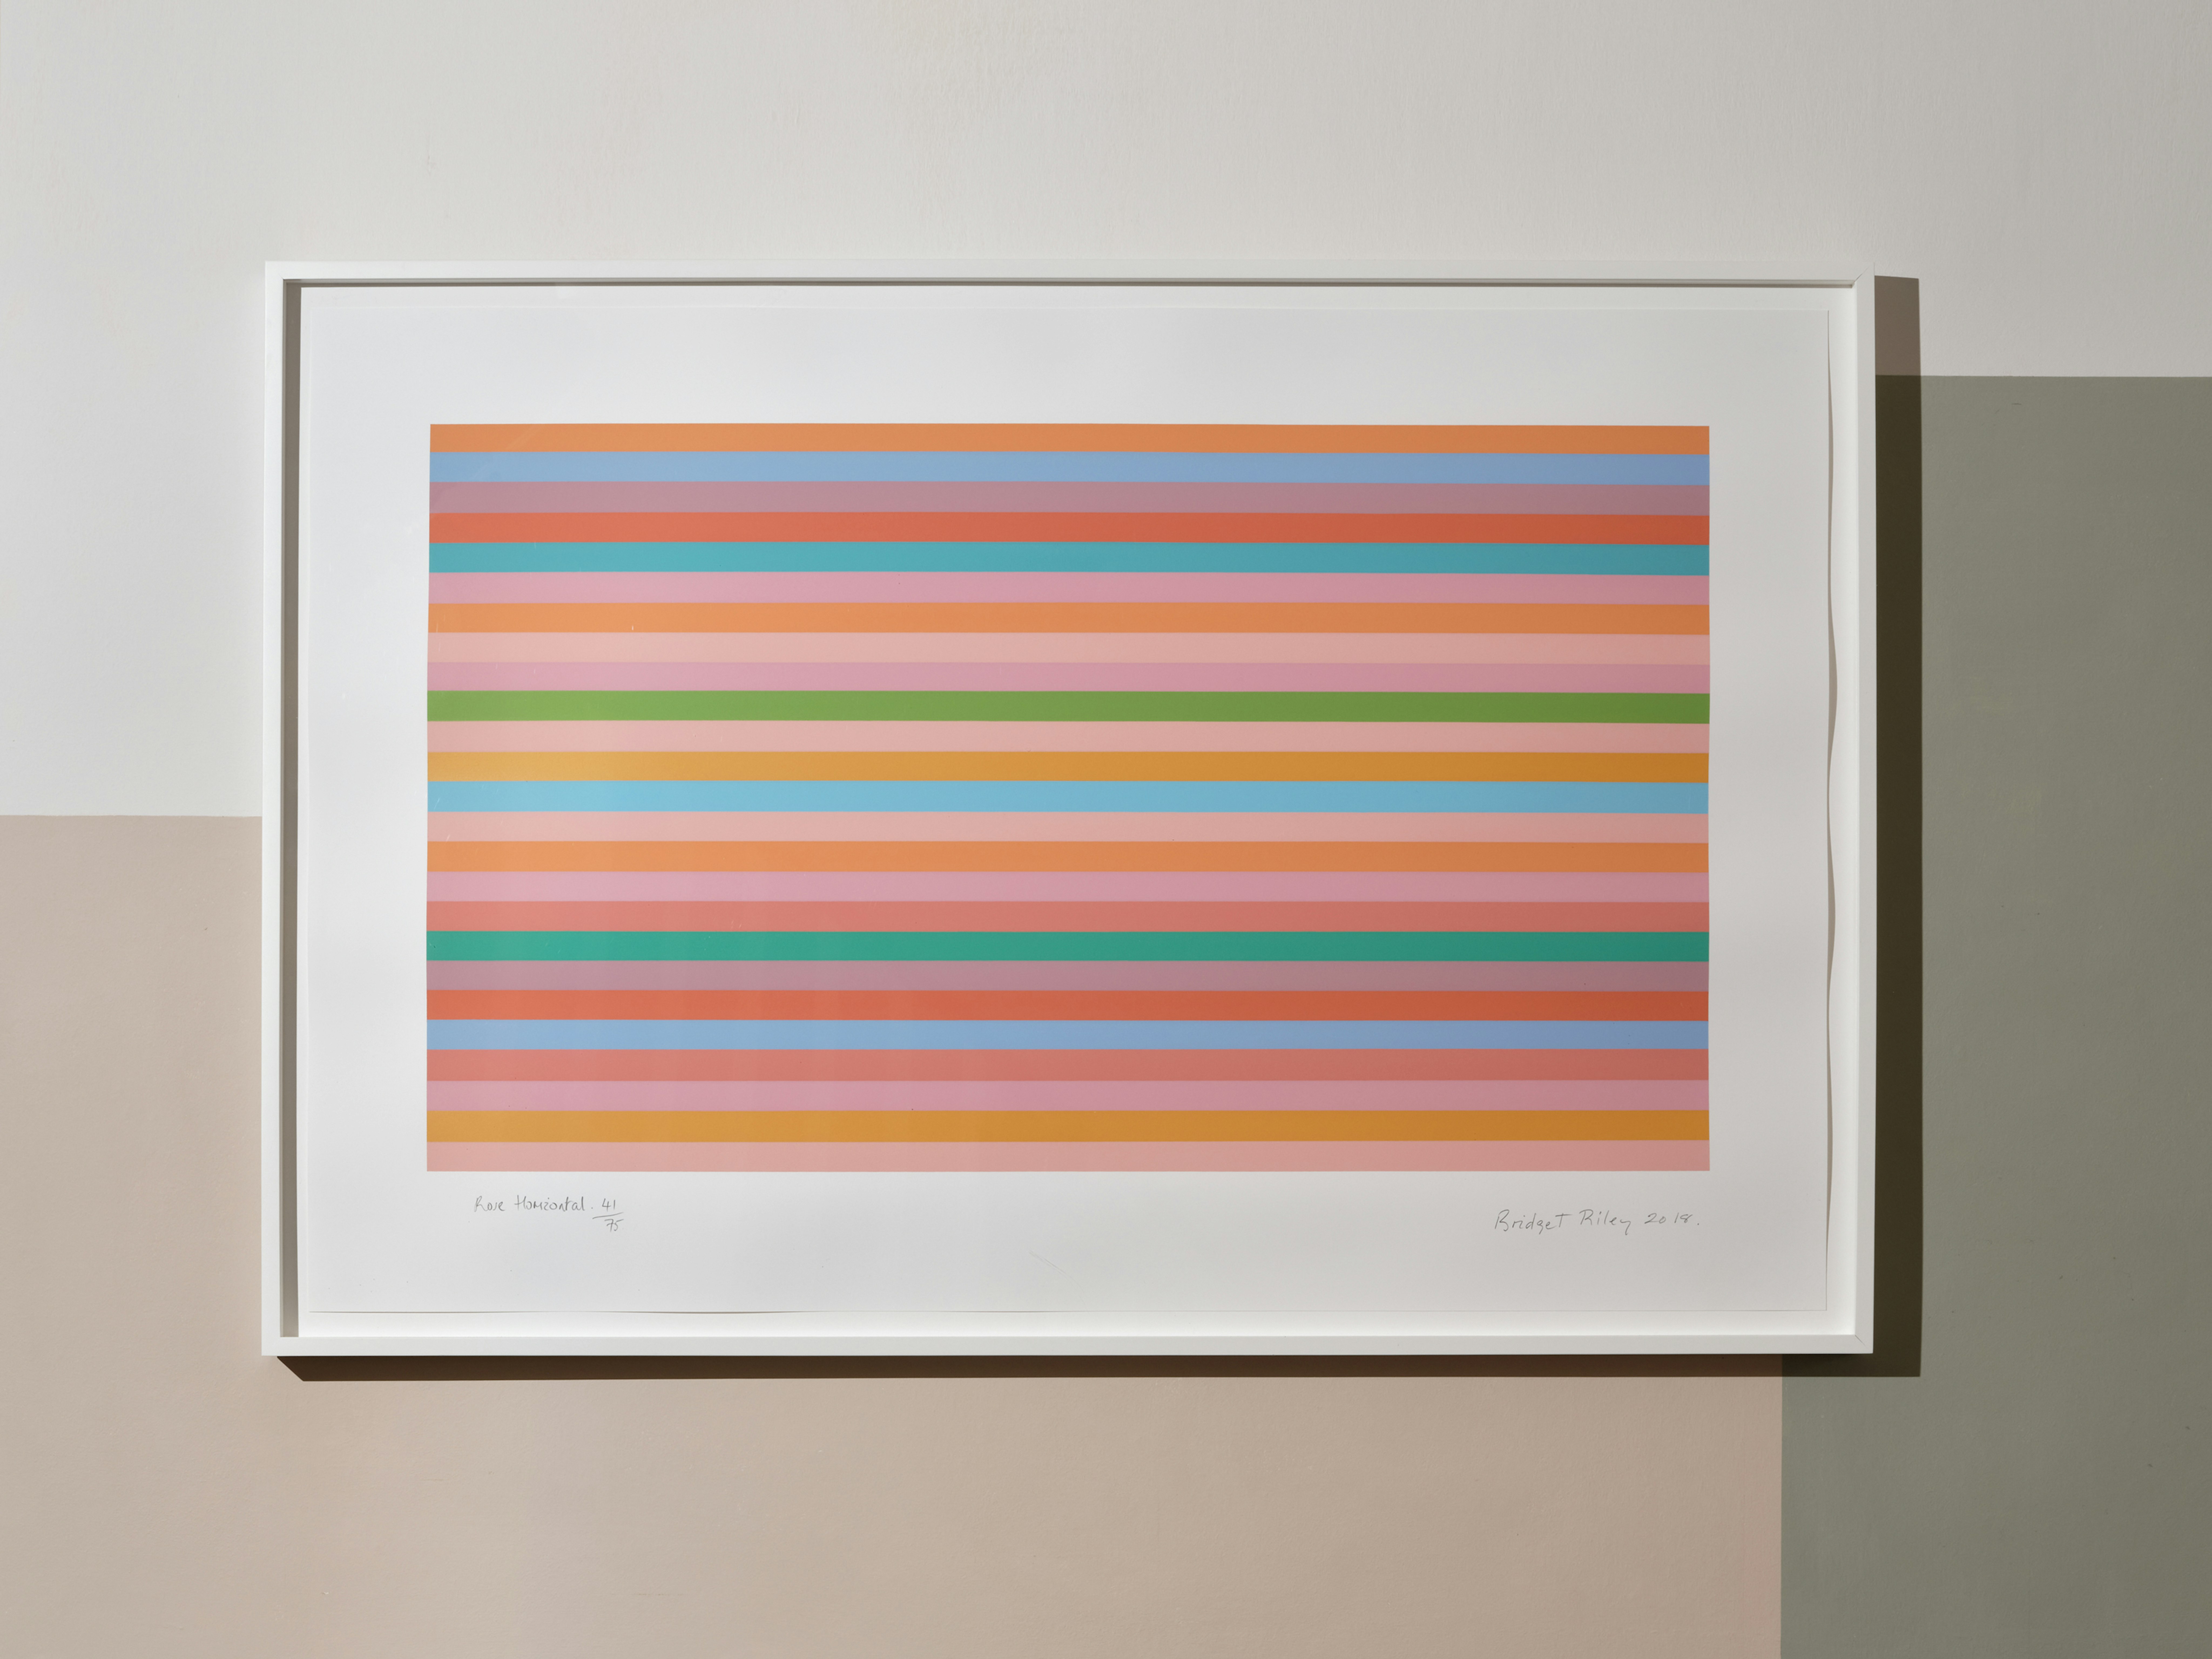 installation photograph of screenprint by Bridget Riley depicting colourful horizontal lines